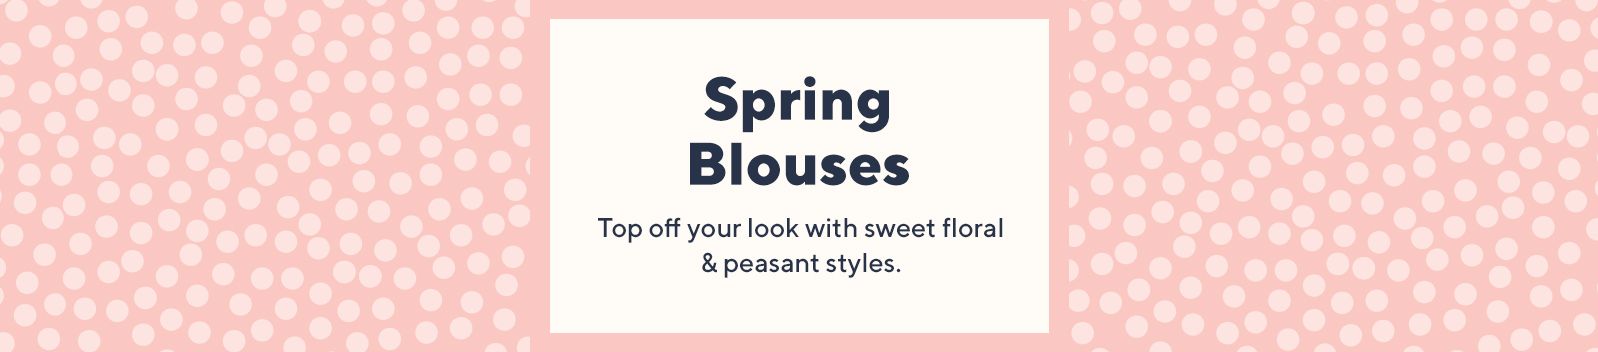 Spring Blouses Top off your look with sweet floral & peasant styles.